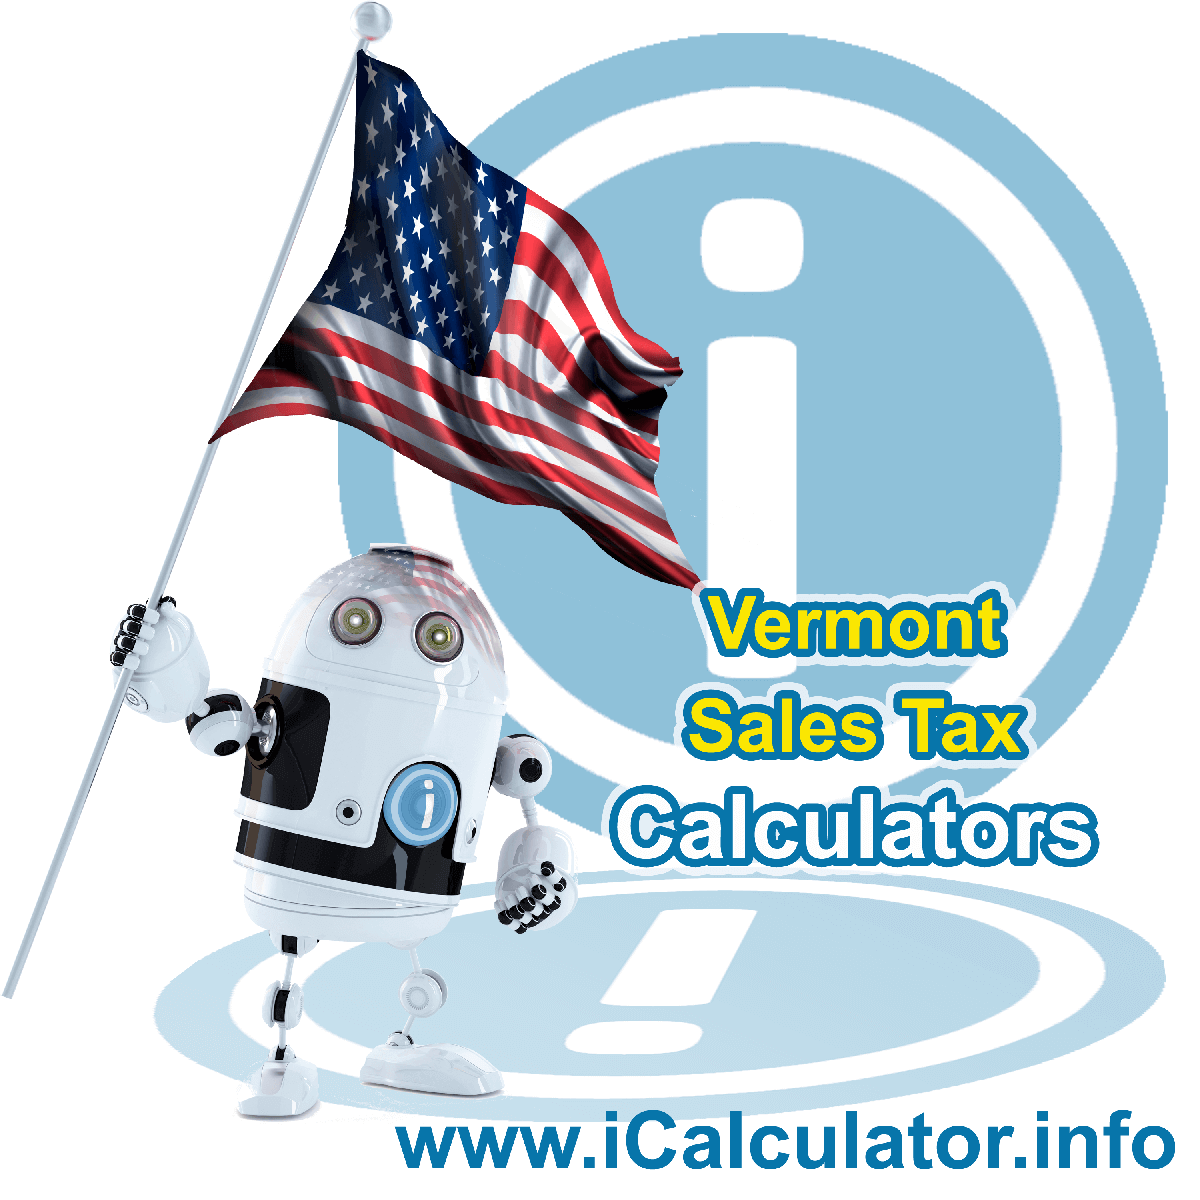 Williston Sales Rates: This image illustrates a calculator robot calculating Williston sales tax manually using the Williston Sales Tax Formula. You can use this information to calculate Williston Sales Tax manually or use the Williston Sales Tax Calculator to calculate sales tax online.